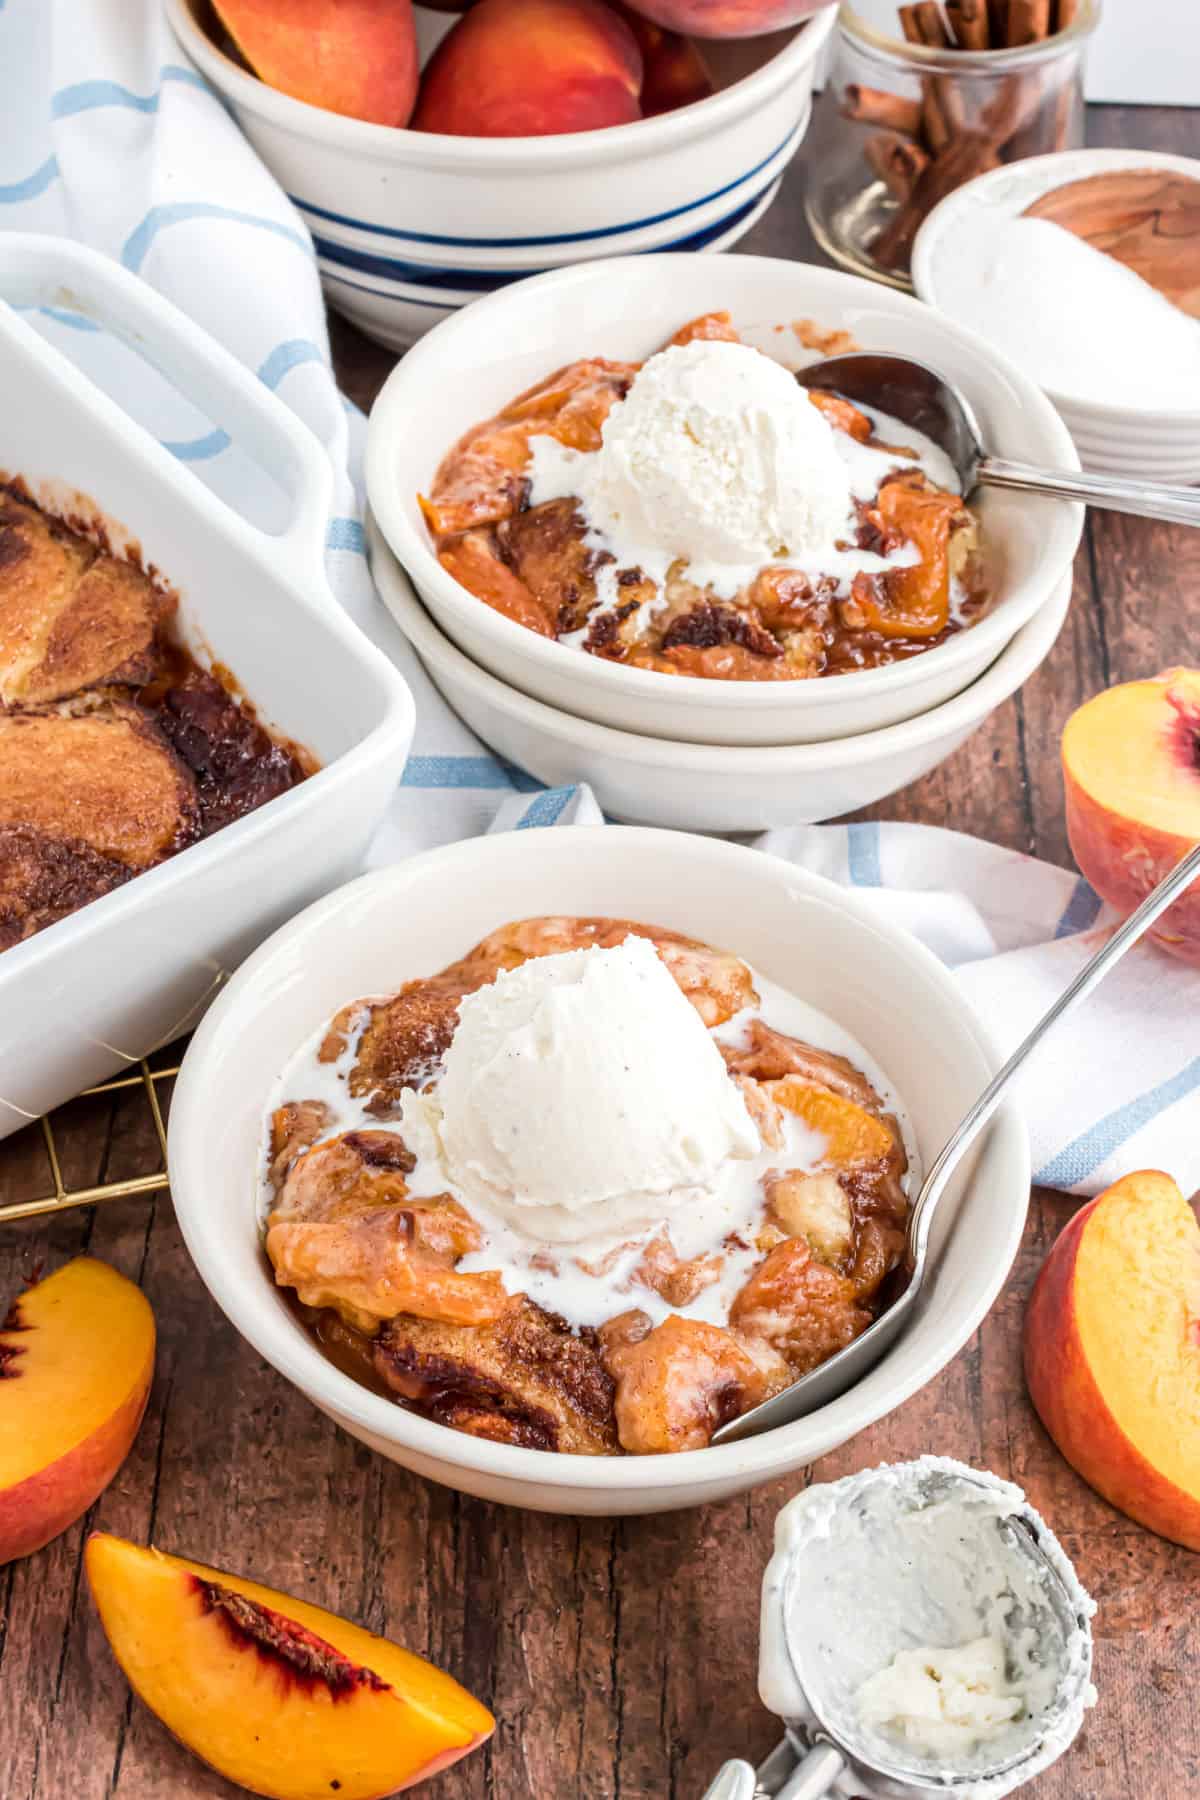 Peach cobbler served in white bowls with ice cream.